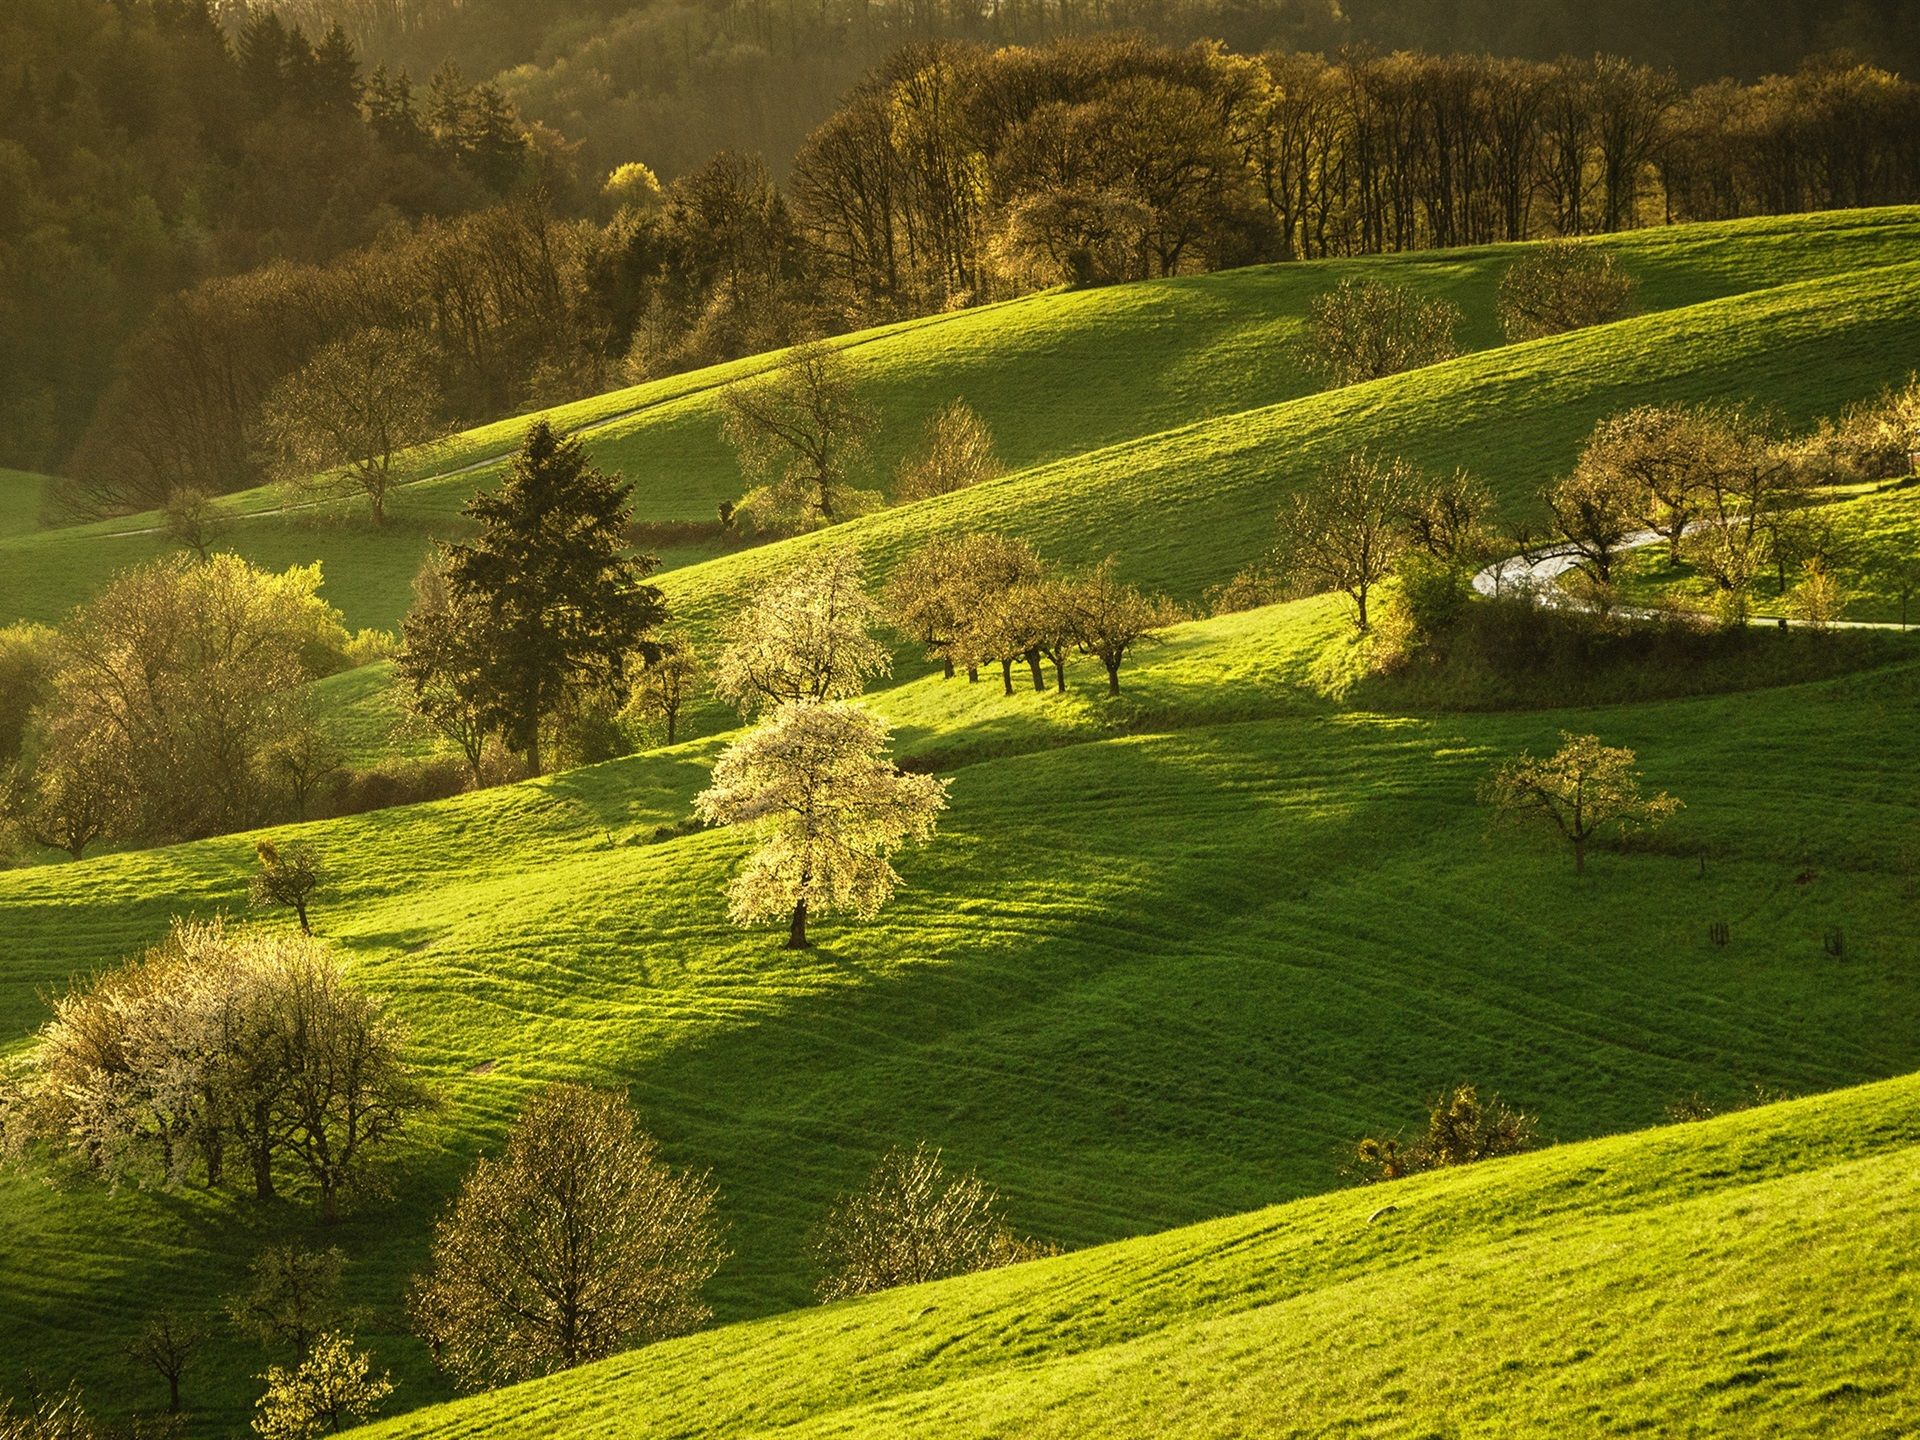 Wallpaper Germany, nature scenery, grass, trees, hills, spring 1920x1440 HD Picture, Image